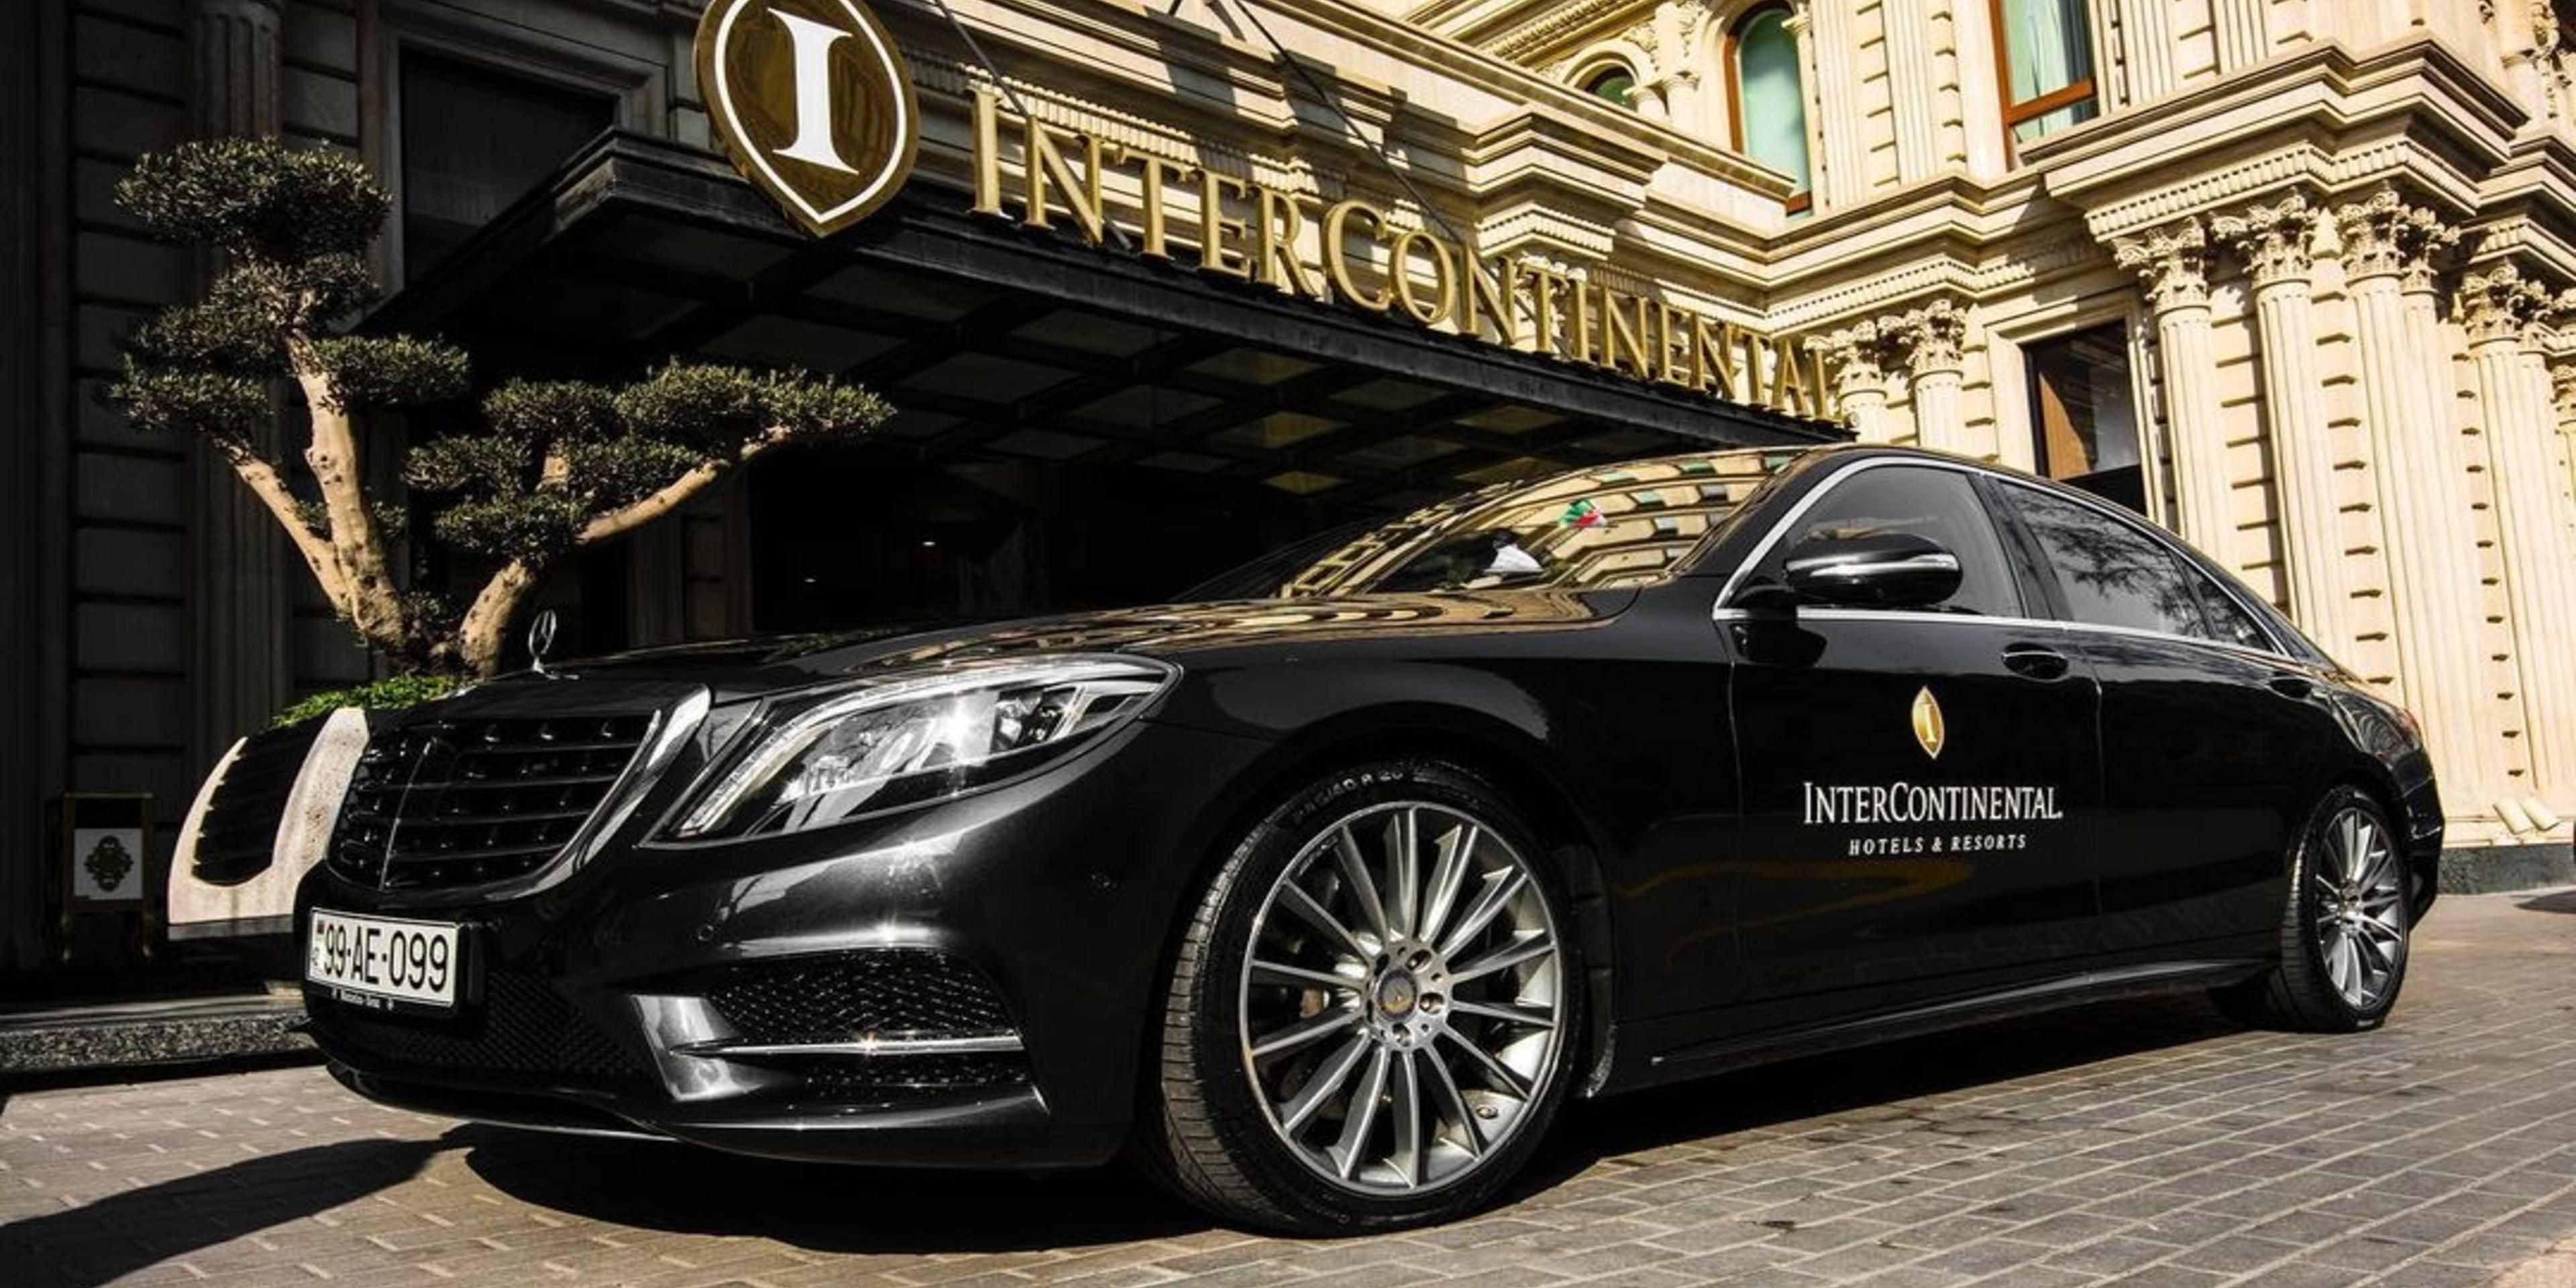 The InterContinental Baku offers you a selection of vehicles for transportation, all with experienced drivers to help you reach your destination. 
Moreover, there are different types of private tour packages organized by our professional Concierge for you to discover the captivating Azerbaijan.